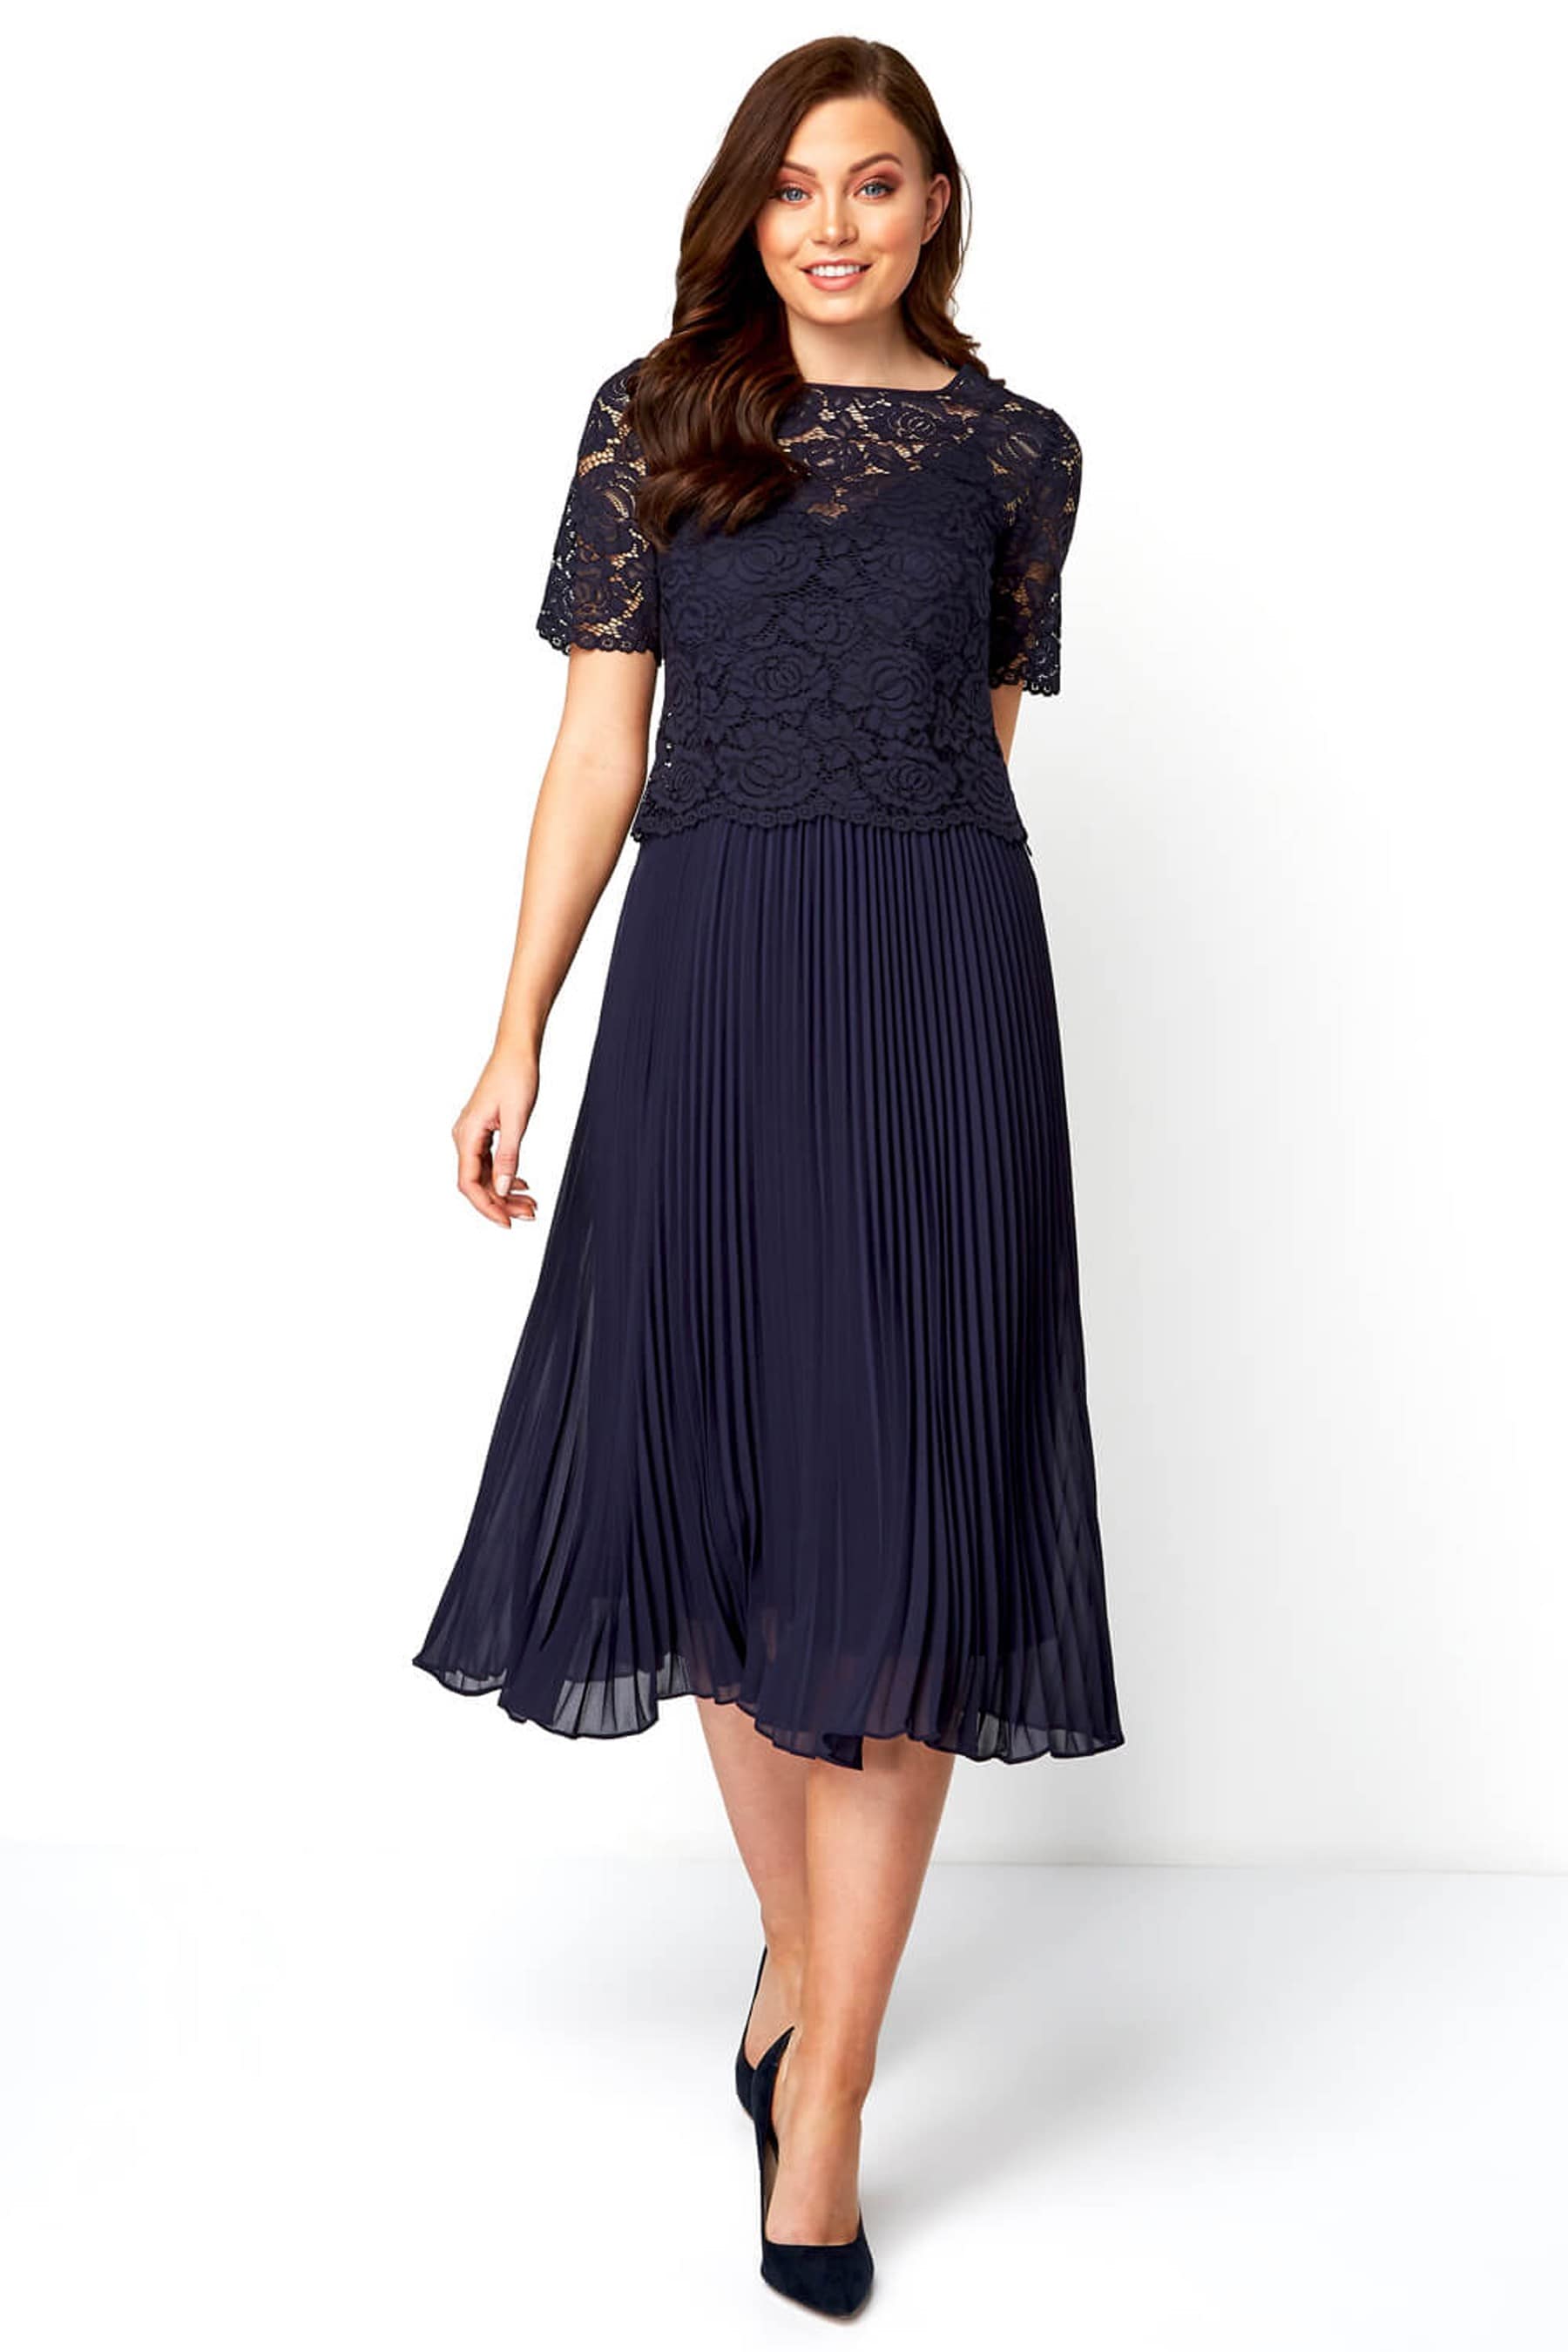 Buy Roman Navy Lace Top Overlay Pleated Midi Dress From The Next Uk Online Shop